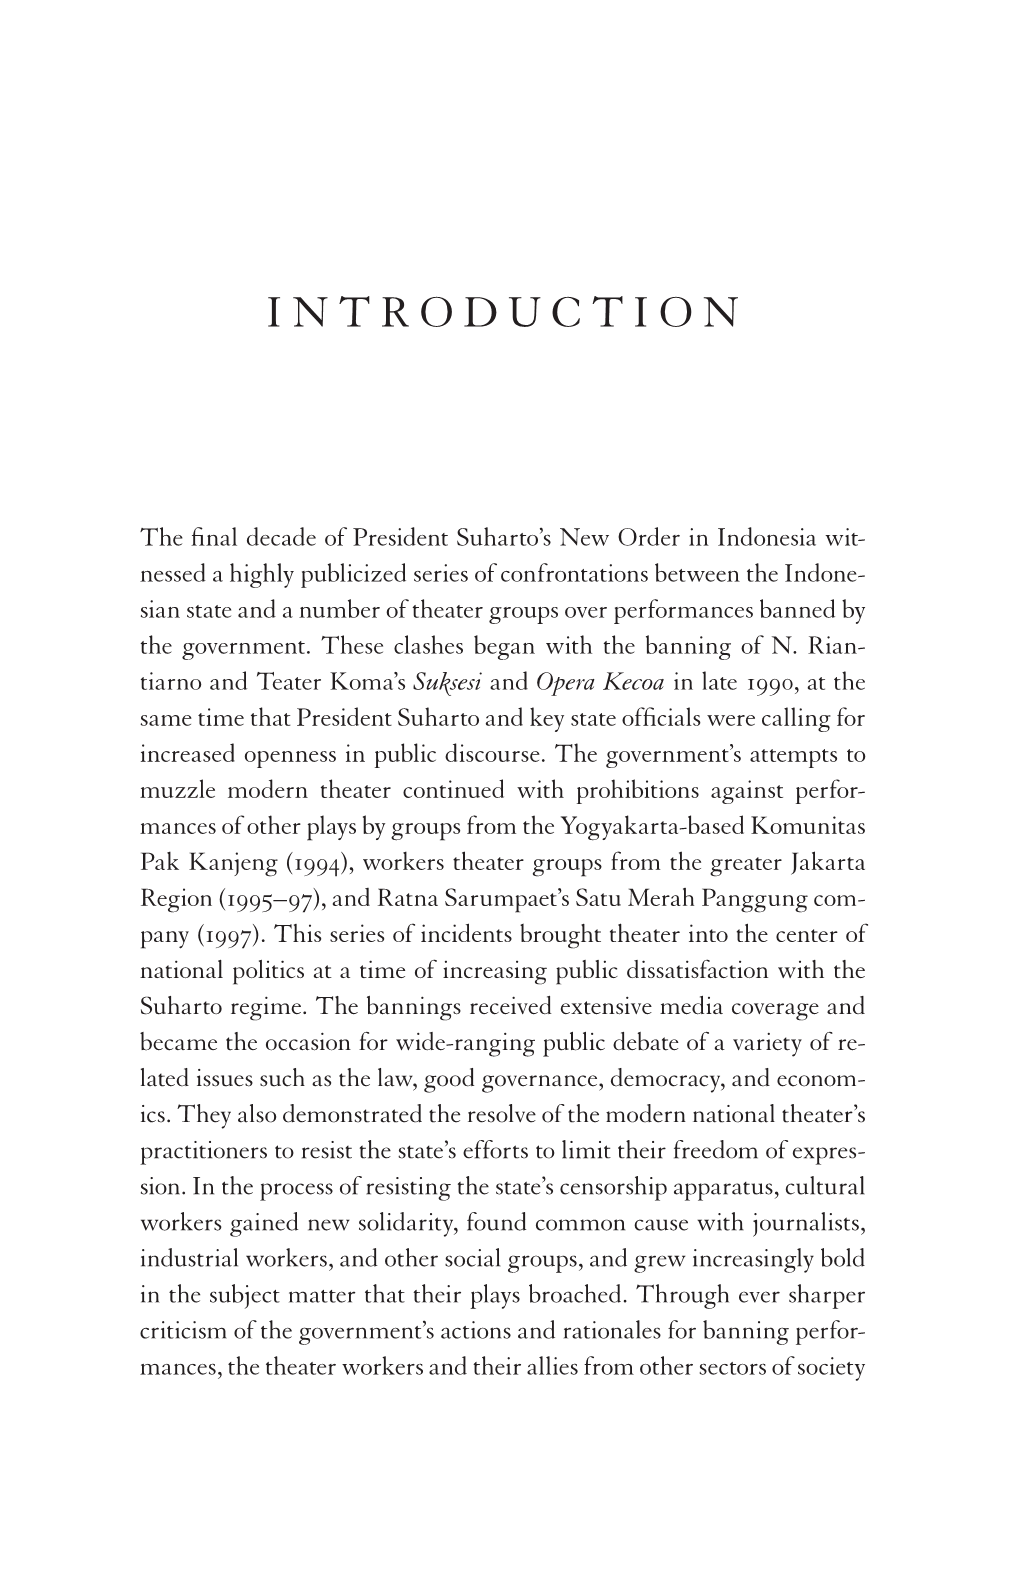 Modern Theater and Politics in Late New Order Indonesia